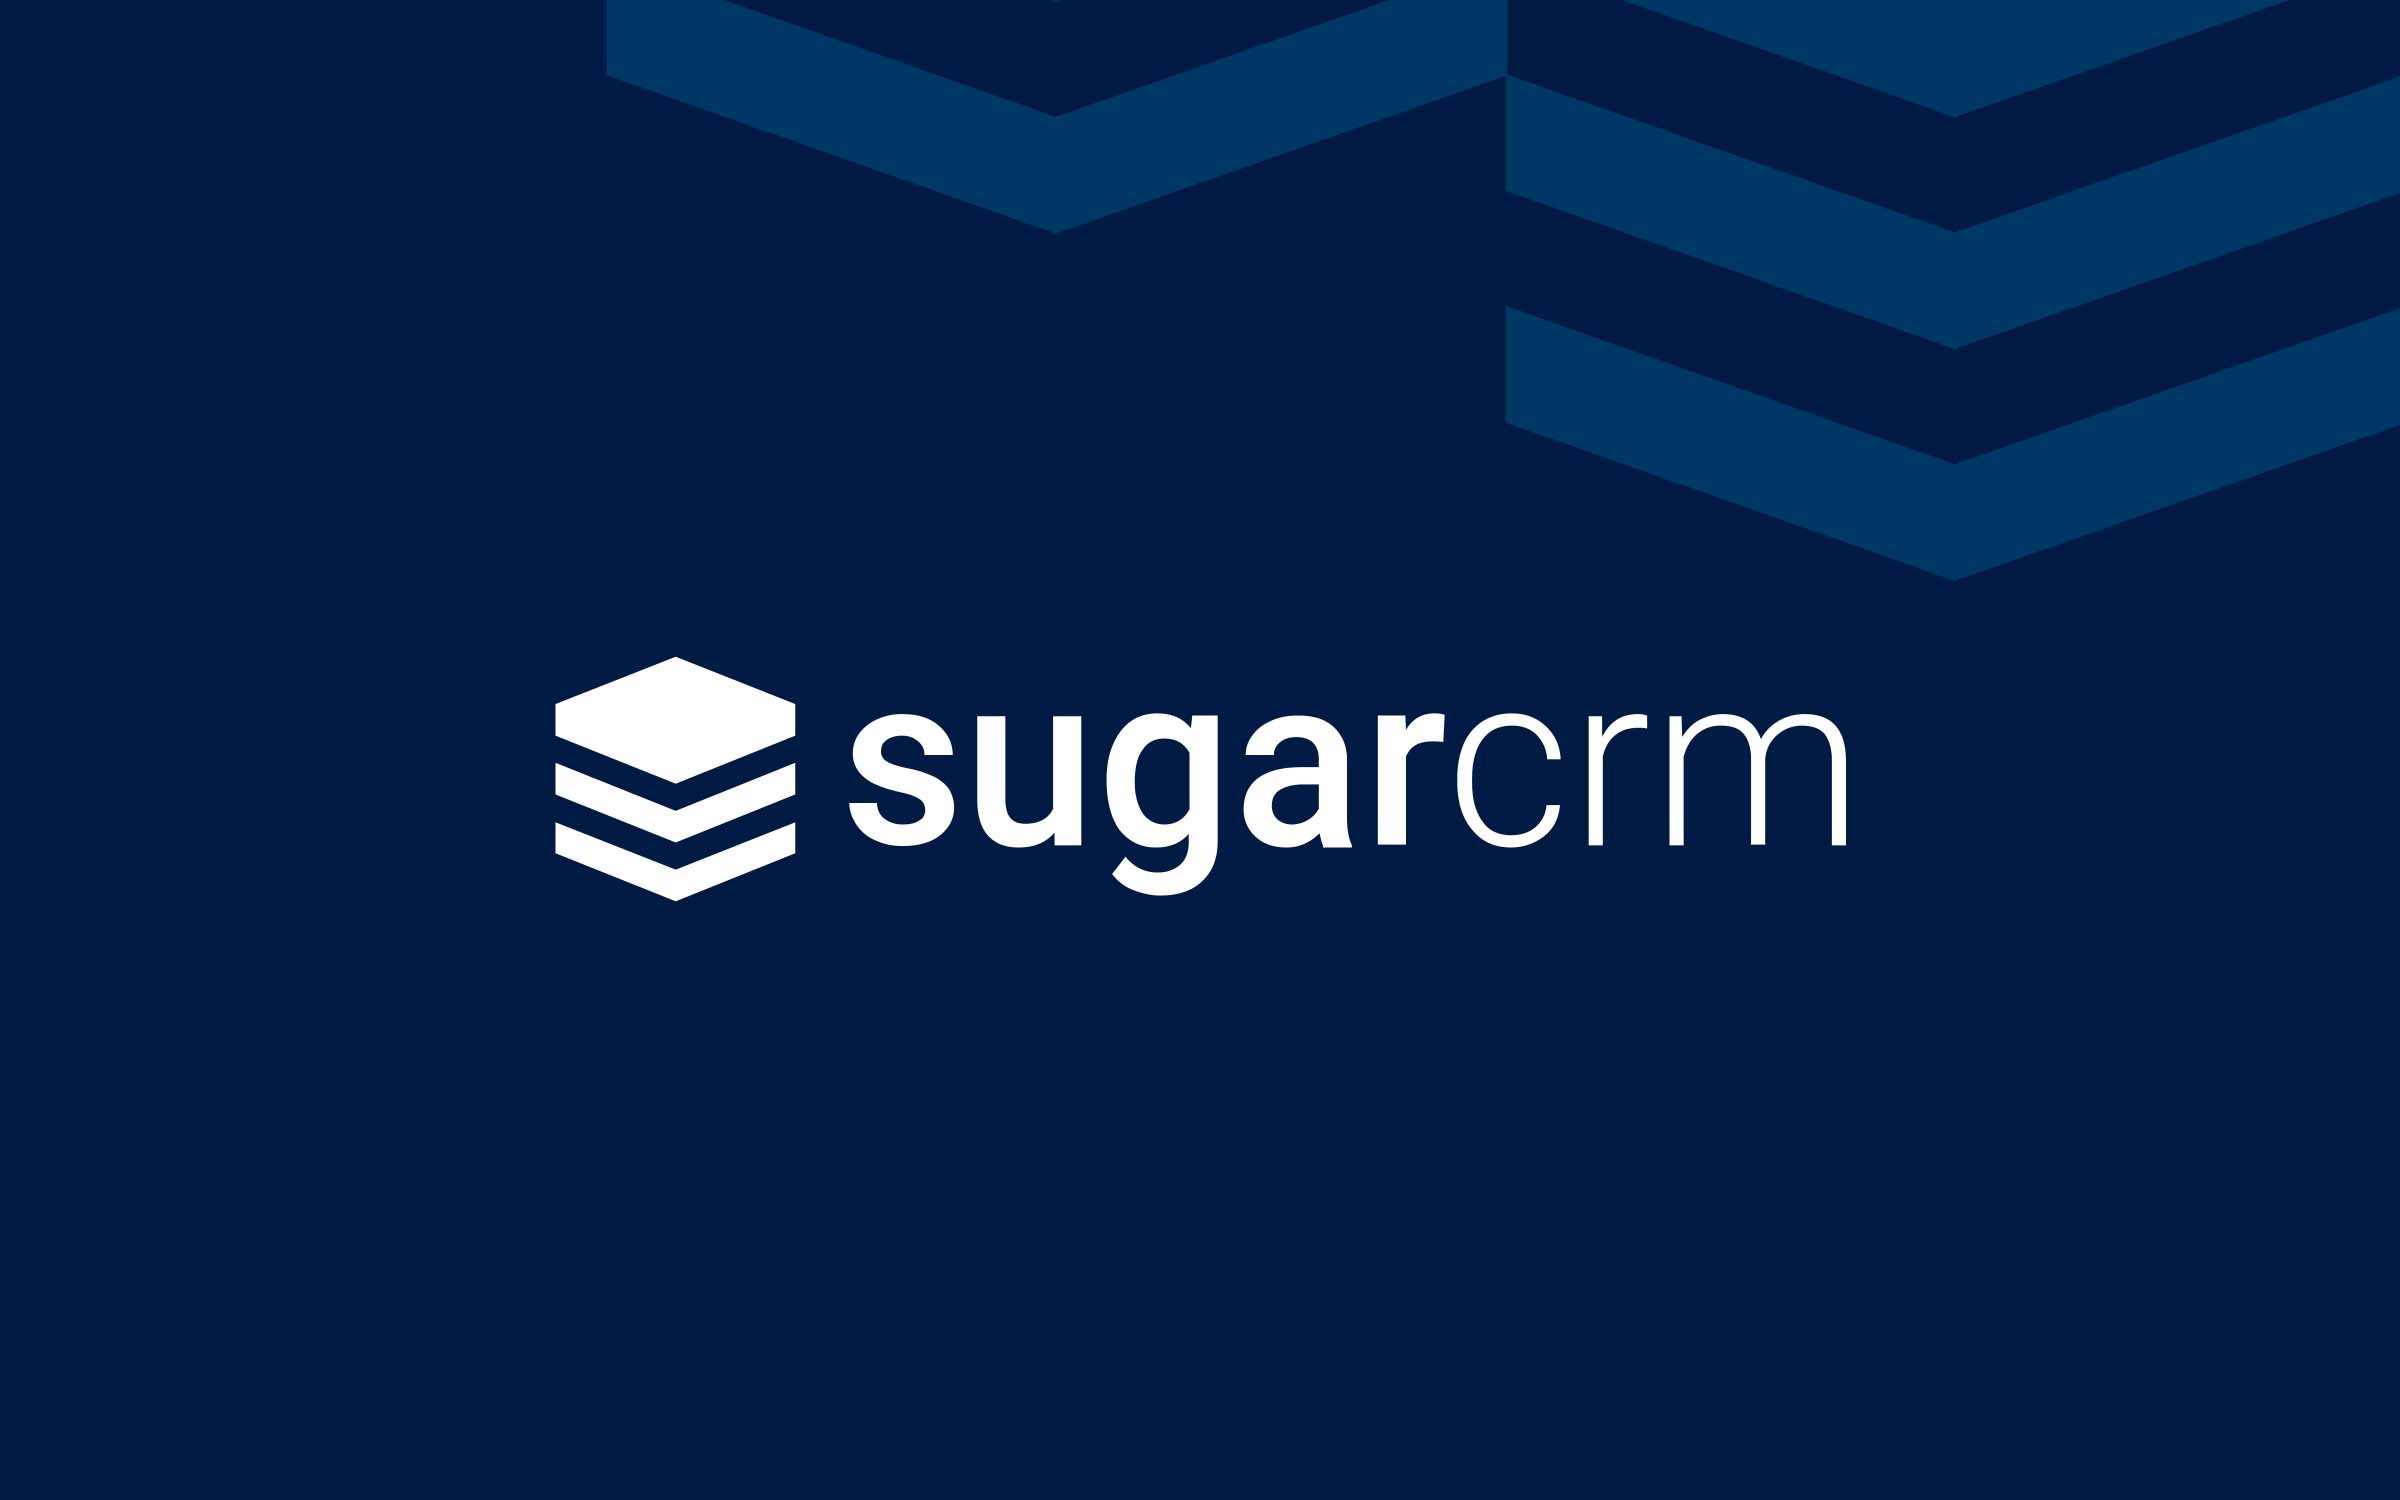 SugarCRM Launches New Podcast Featuring Seasoned Business Leaders on Unlocking the Secrets to Sustained Growth